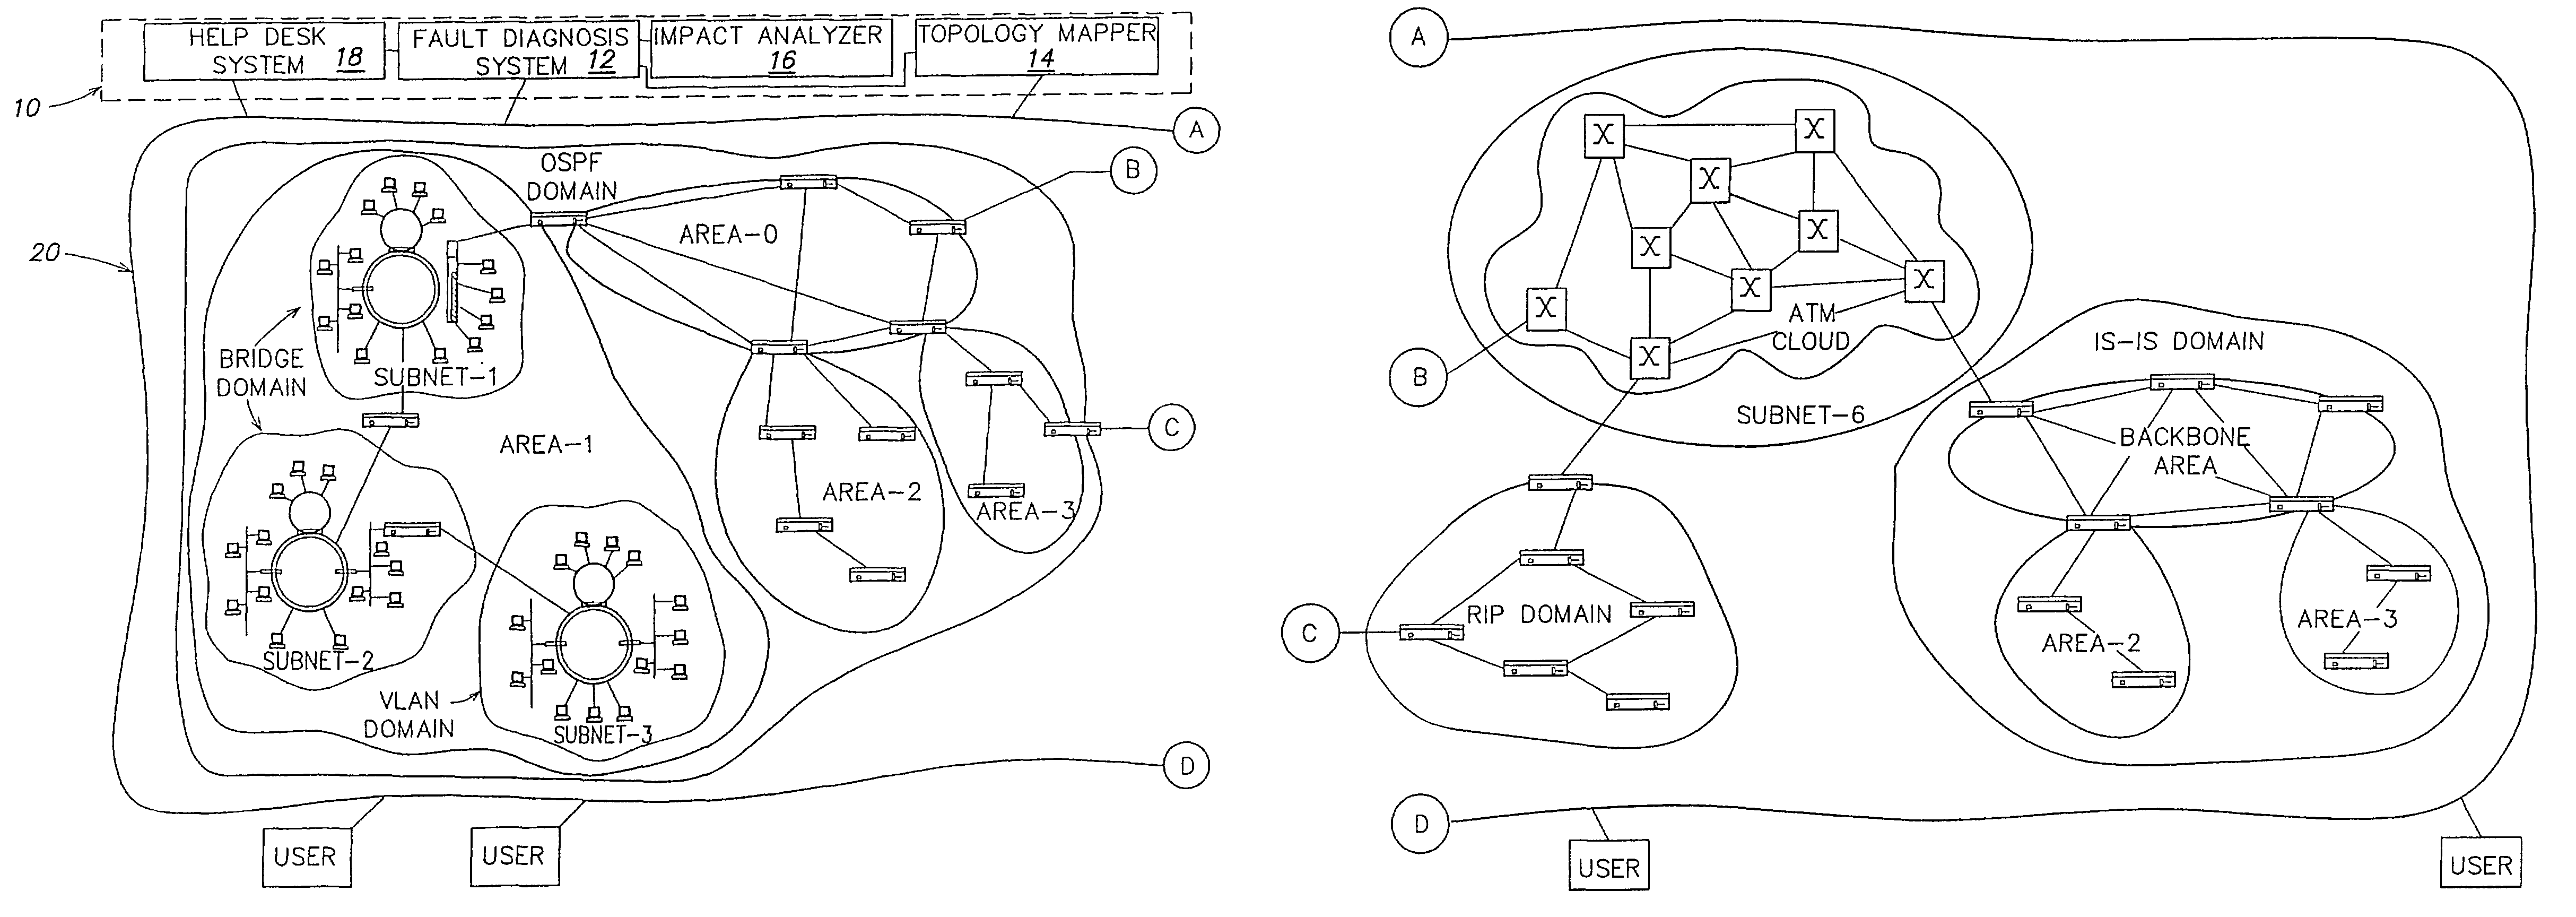 Systems and methods for constructing multi-layer topological models of computer networks